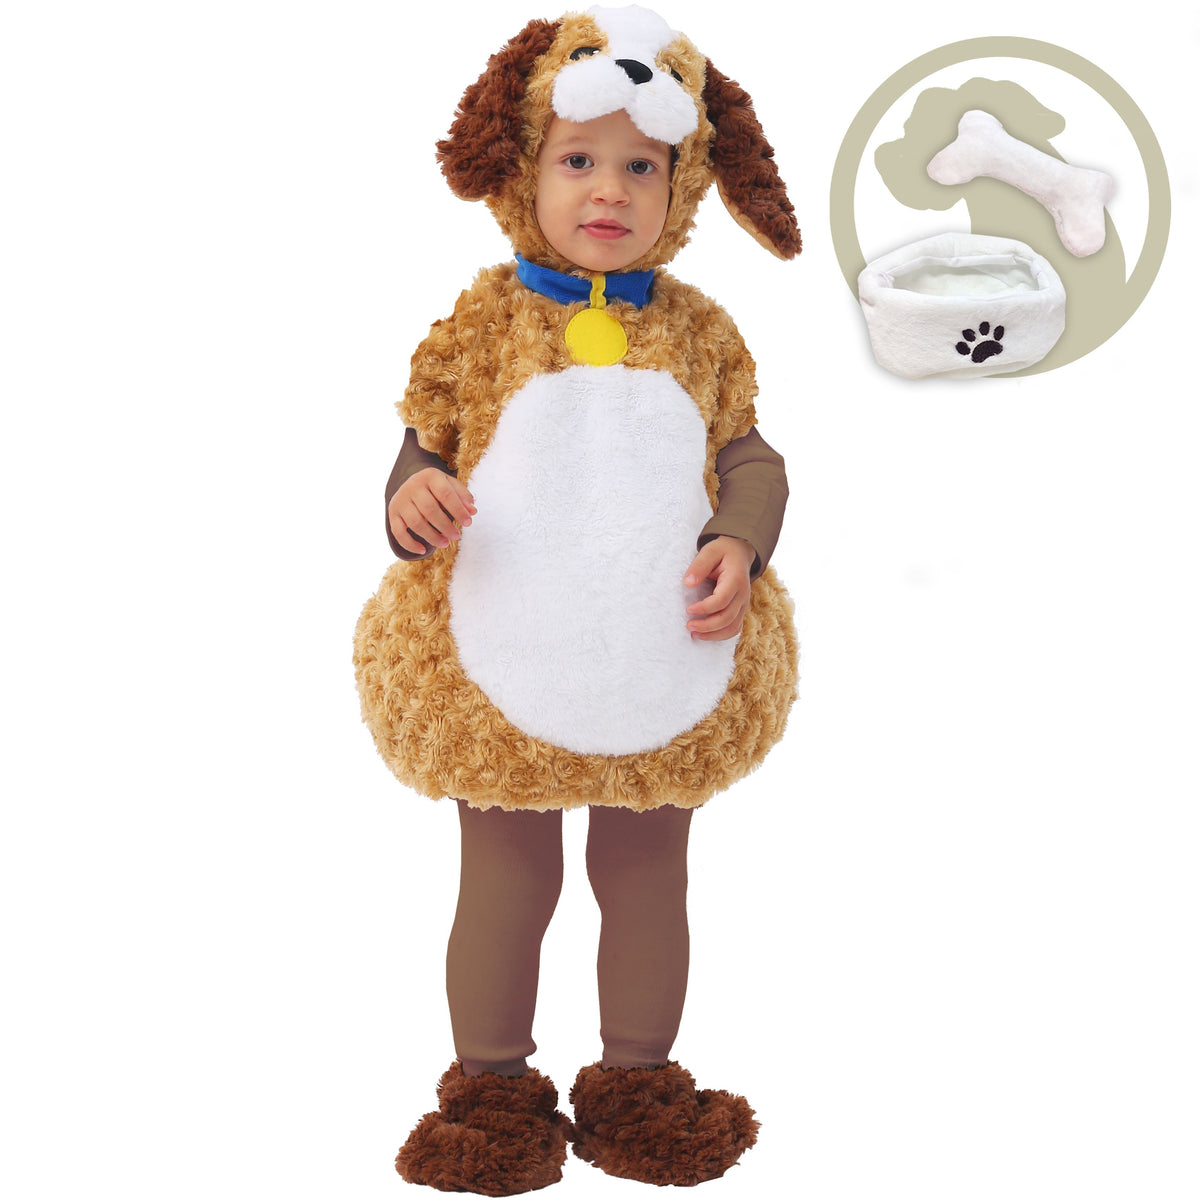 Cuddly Puppy Costume - Child | Spooktacular Creations